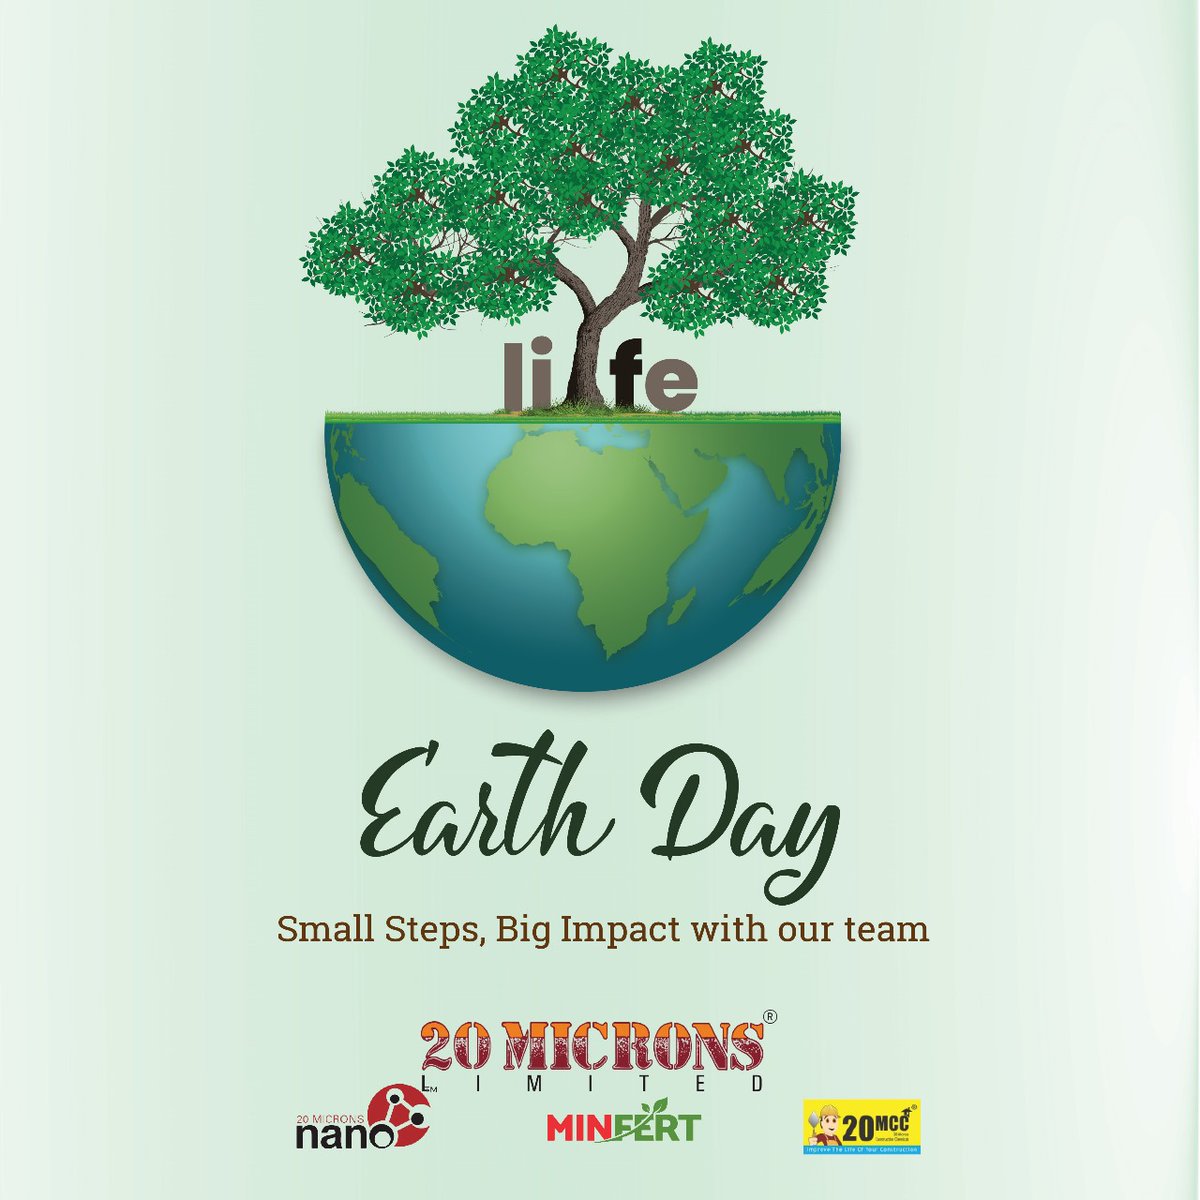 We're committed to small changes that make a big difference. Join us in nurturing our planet. Let's celebrate Earth Day in our style. #worldearthday #earthfriendly #earthday #happyearthday #planet #earthfriendly #earthhealthy #ecofriendly